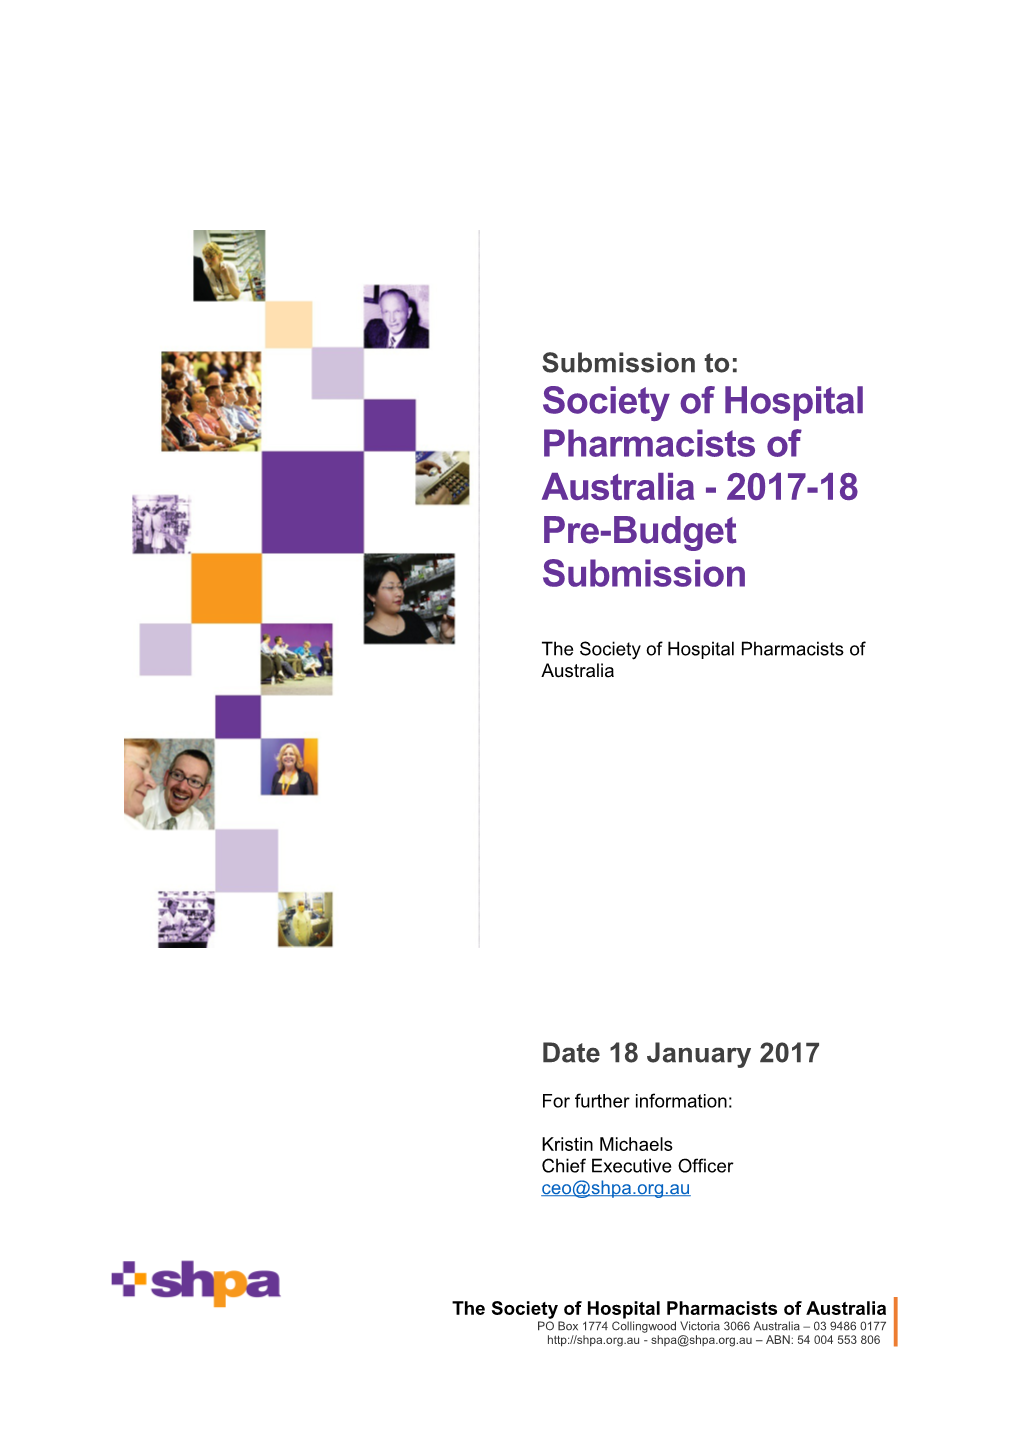 Society of Hospital Pharmacists of Australia - 2017-18 Pre-Budget Submission